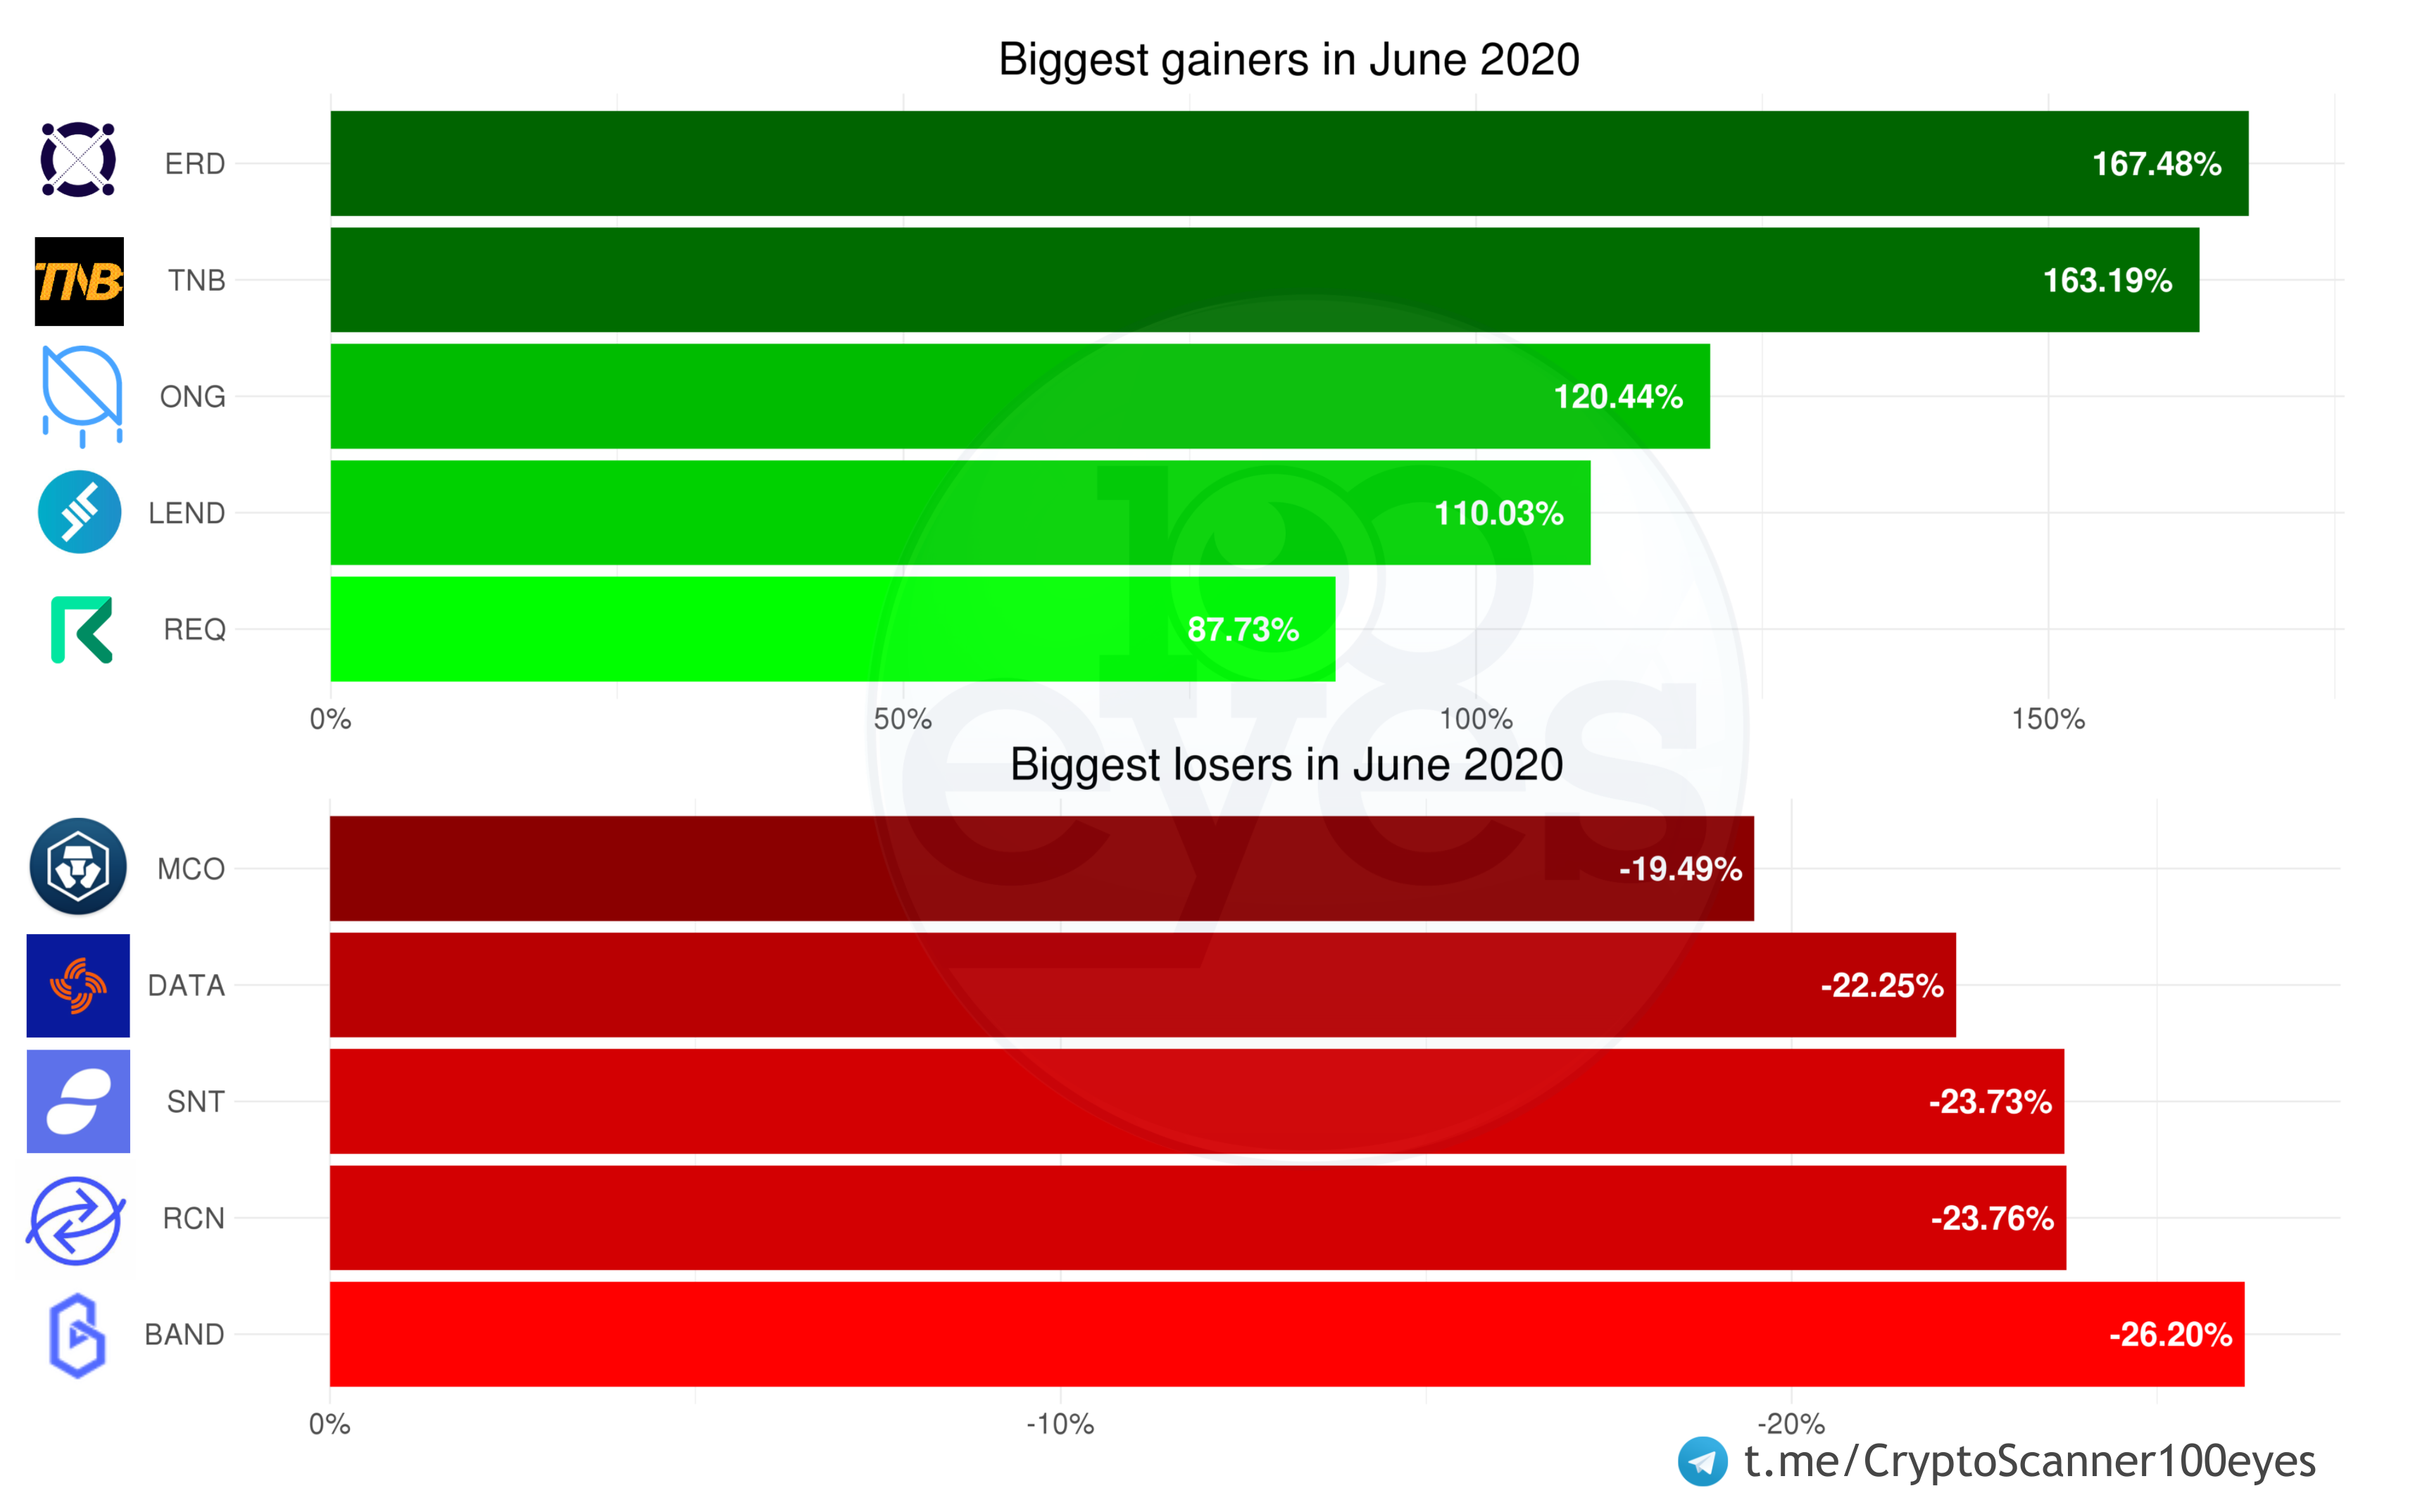 Of course the crypto market recovered amazingly fast after the COVID-19 crash. April and May were very strong. How did the crypto market perform in June